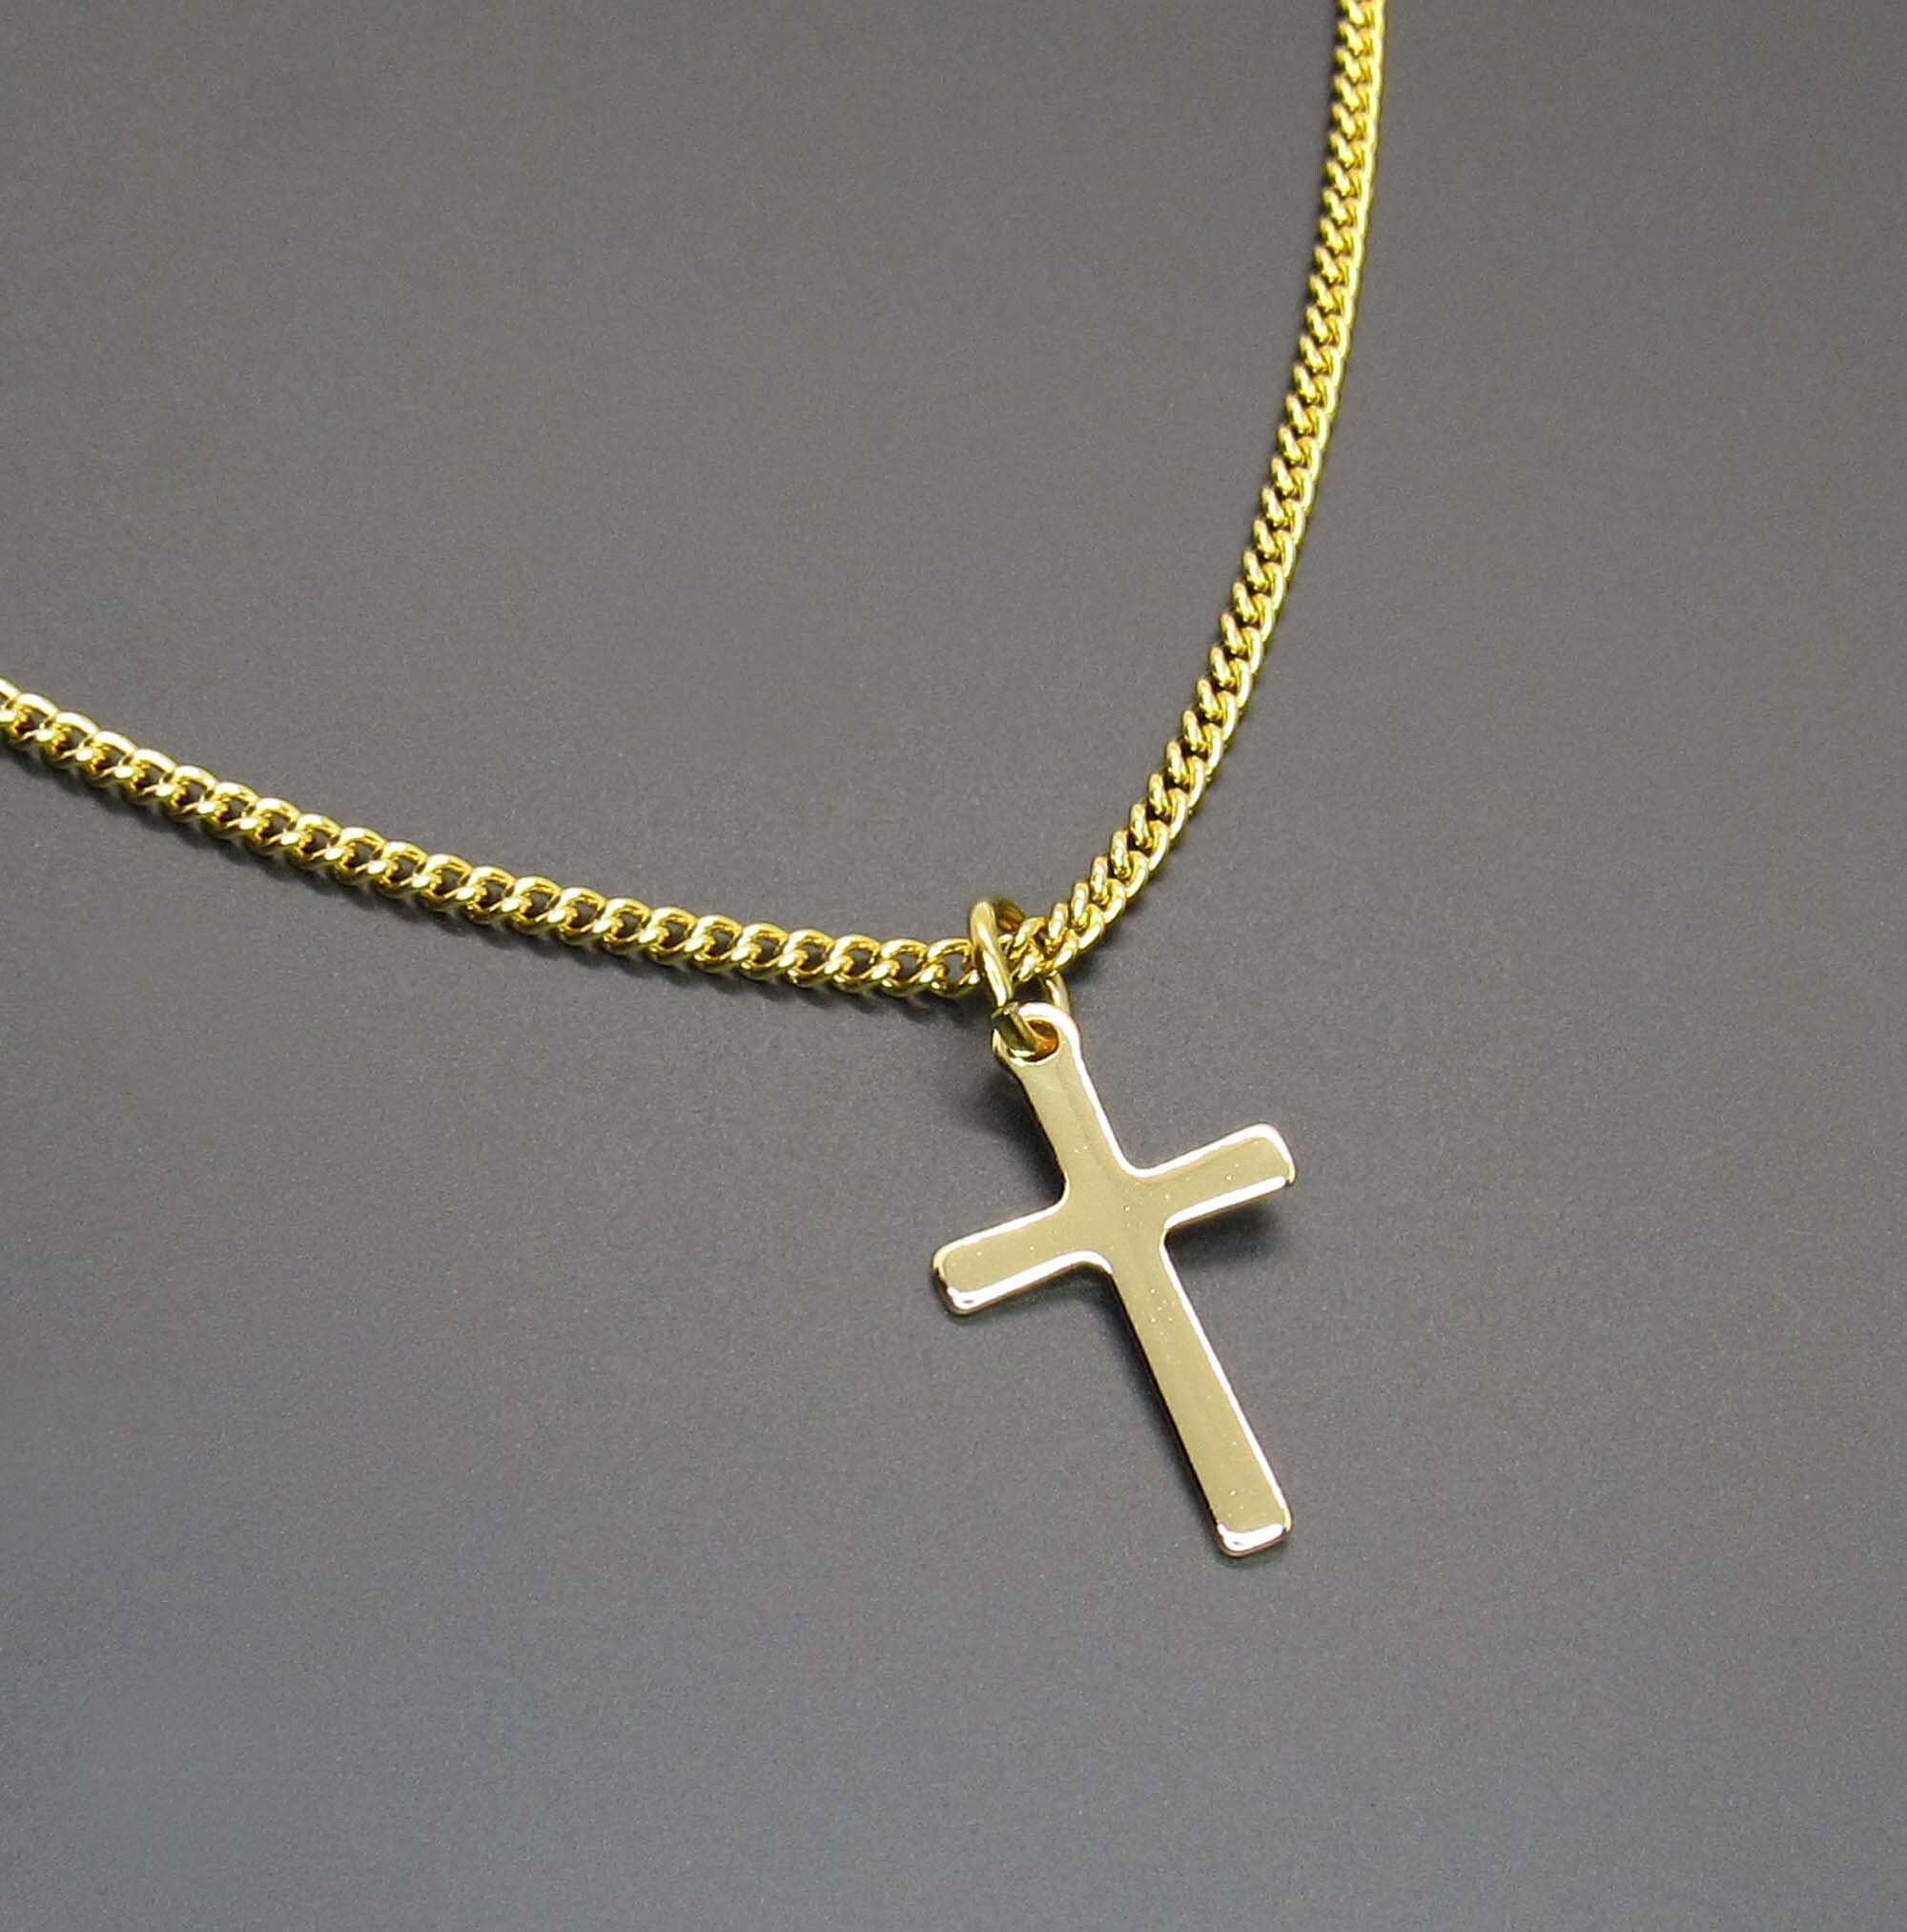 Stainless Steel Gold Tone Small Cross Charm Pendant Necklace, Men's ...